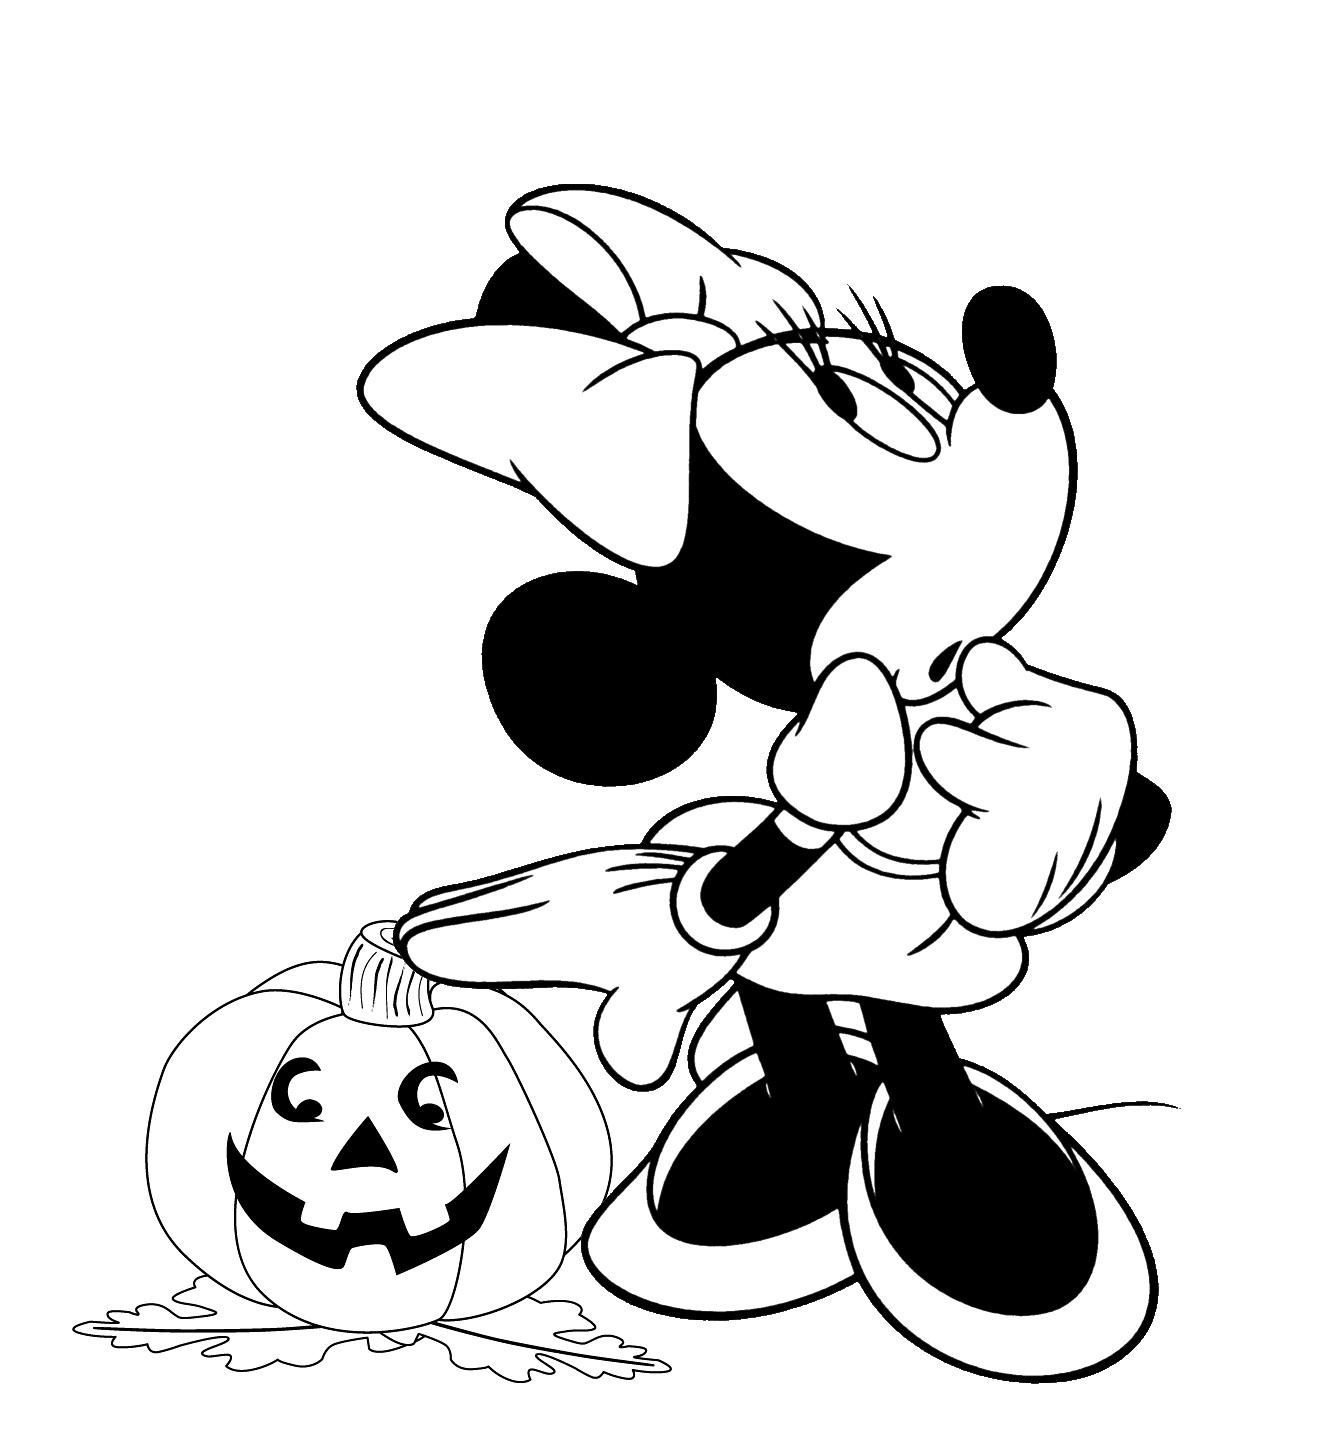 Mickey Et Minnie Coloriage Luxe Stock Minnie Halloween Coloriage Minnie Coloriages Pour Enfants